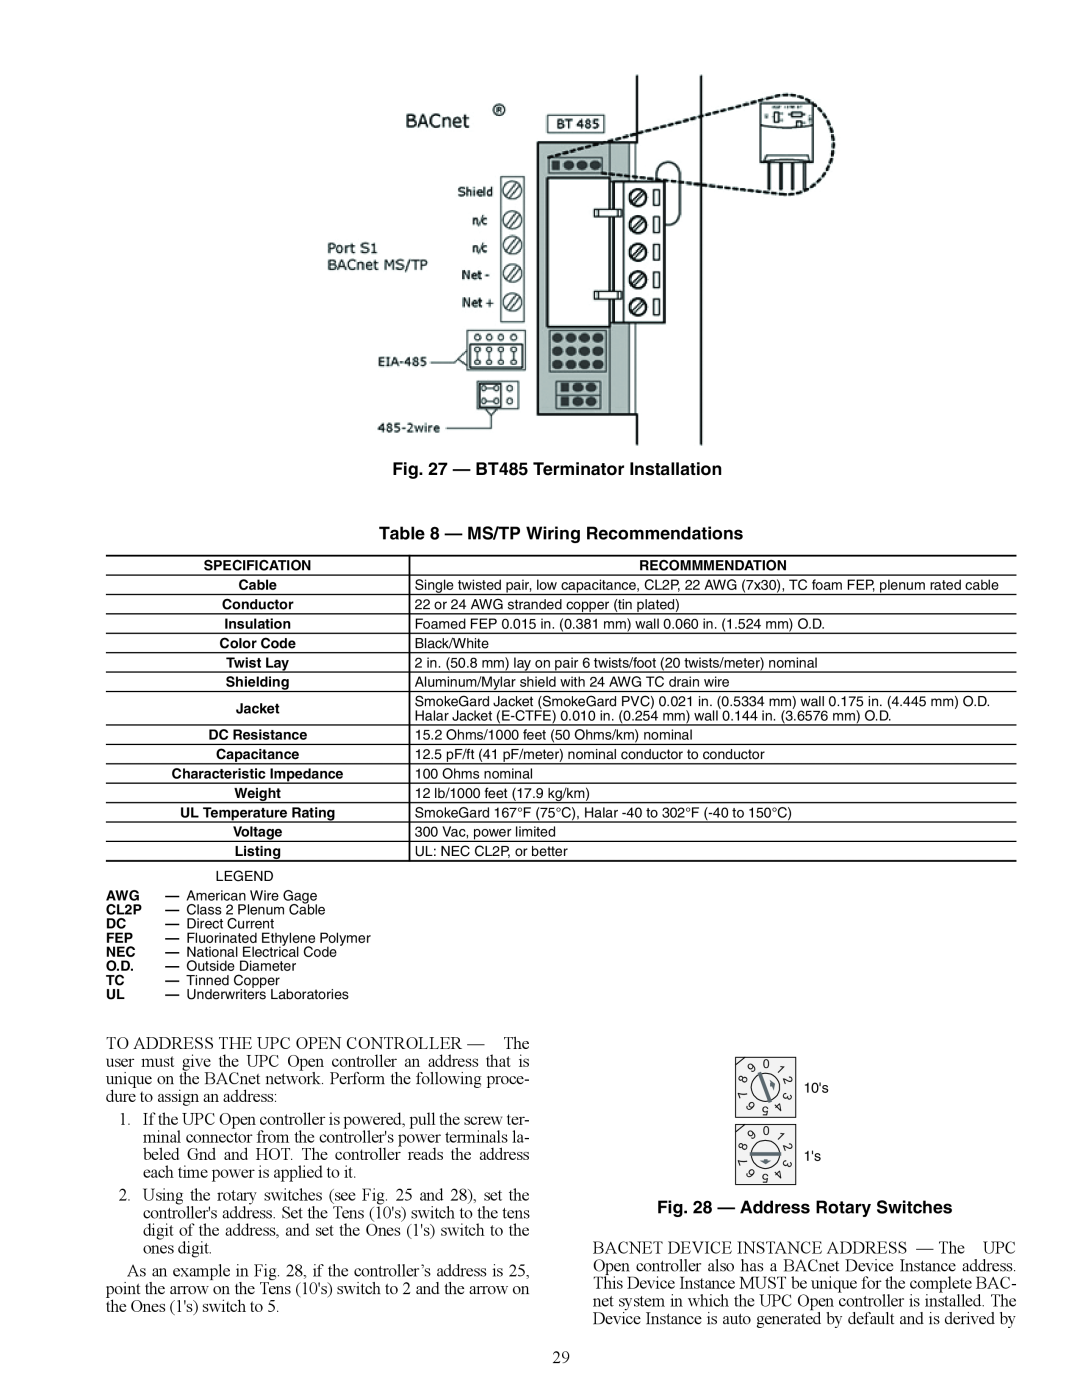 Carrier 62E specifications BT485 Terminator Installation, MS/TP Wiring Recommendations, Address Rotary Switches 